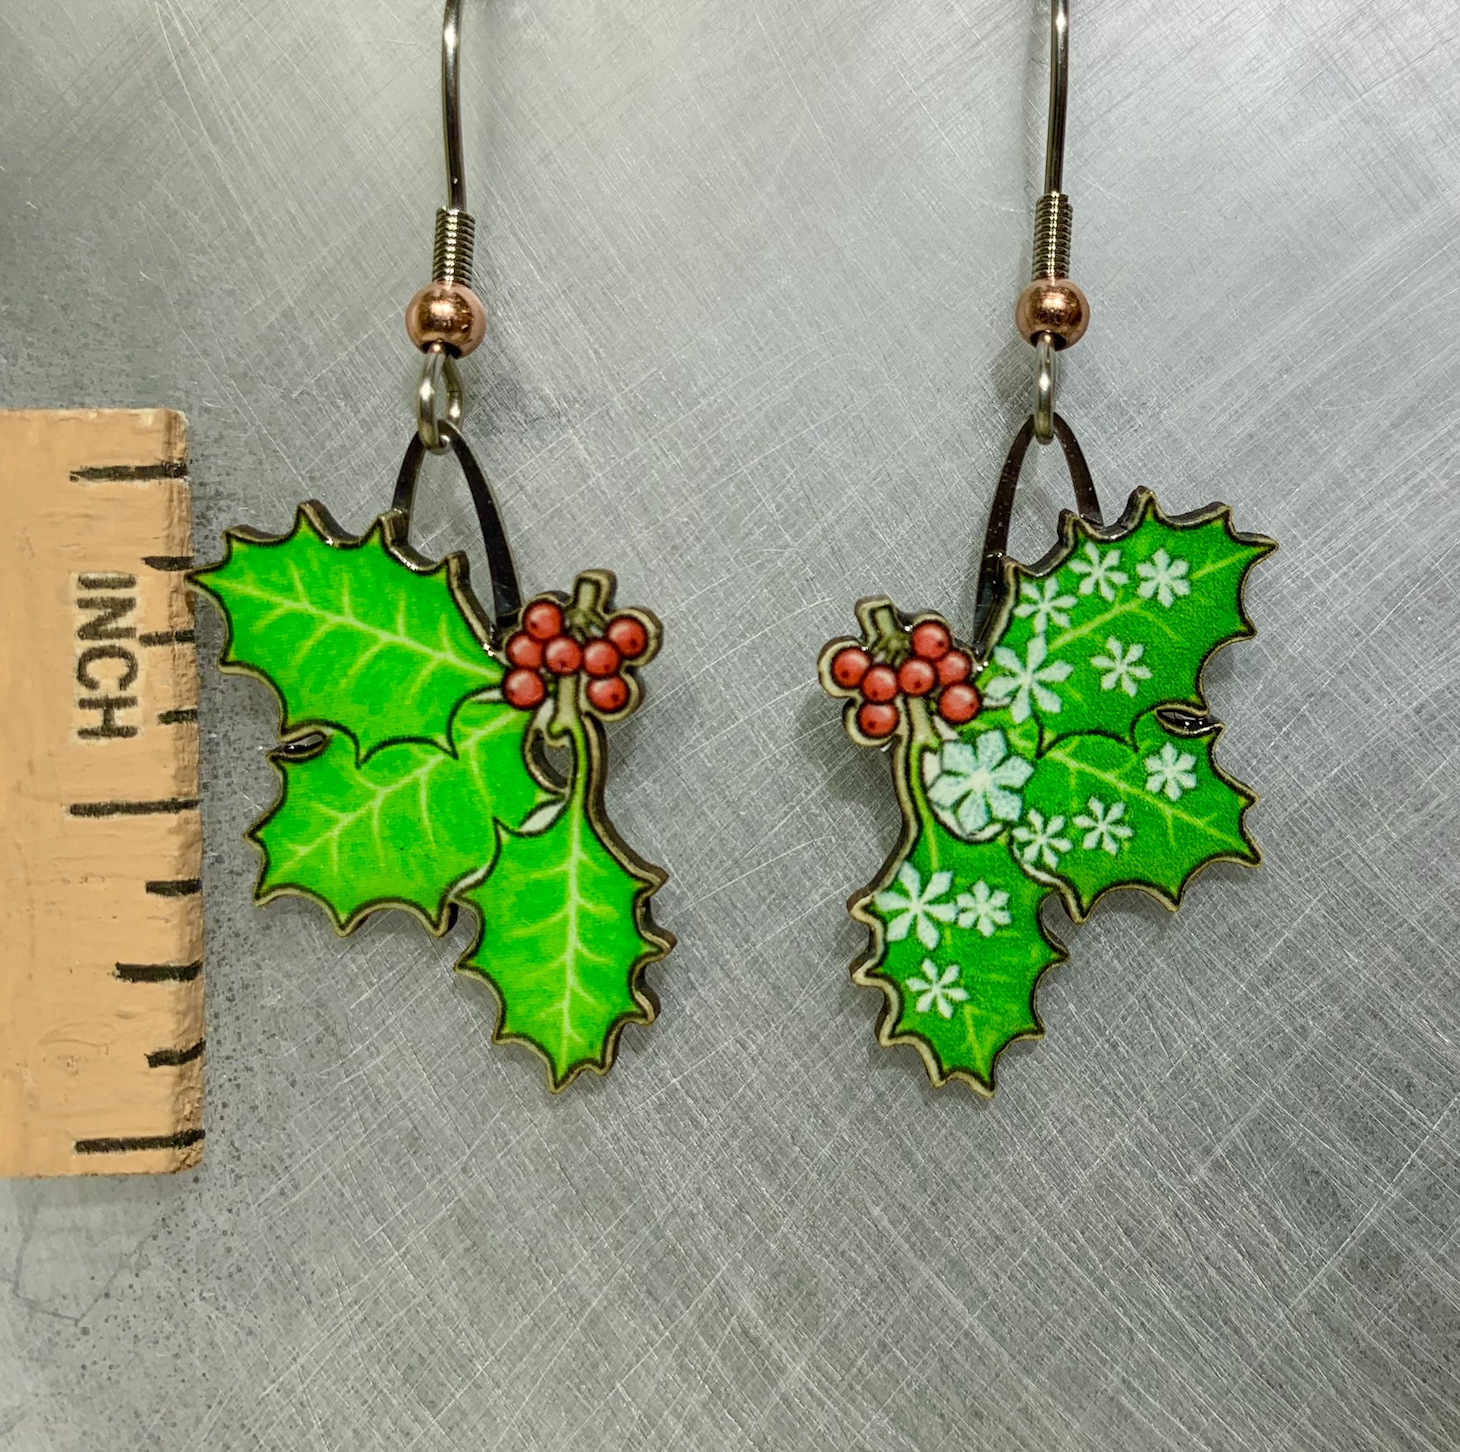 Picture shown is of 1 inch tall pair of earrings of Holly Leaves.